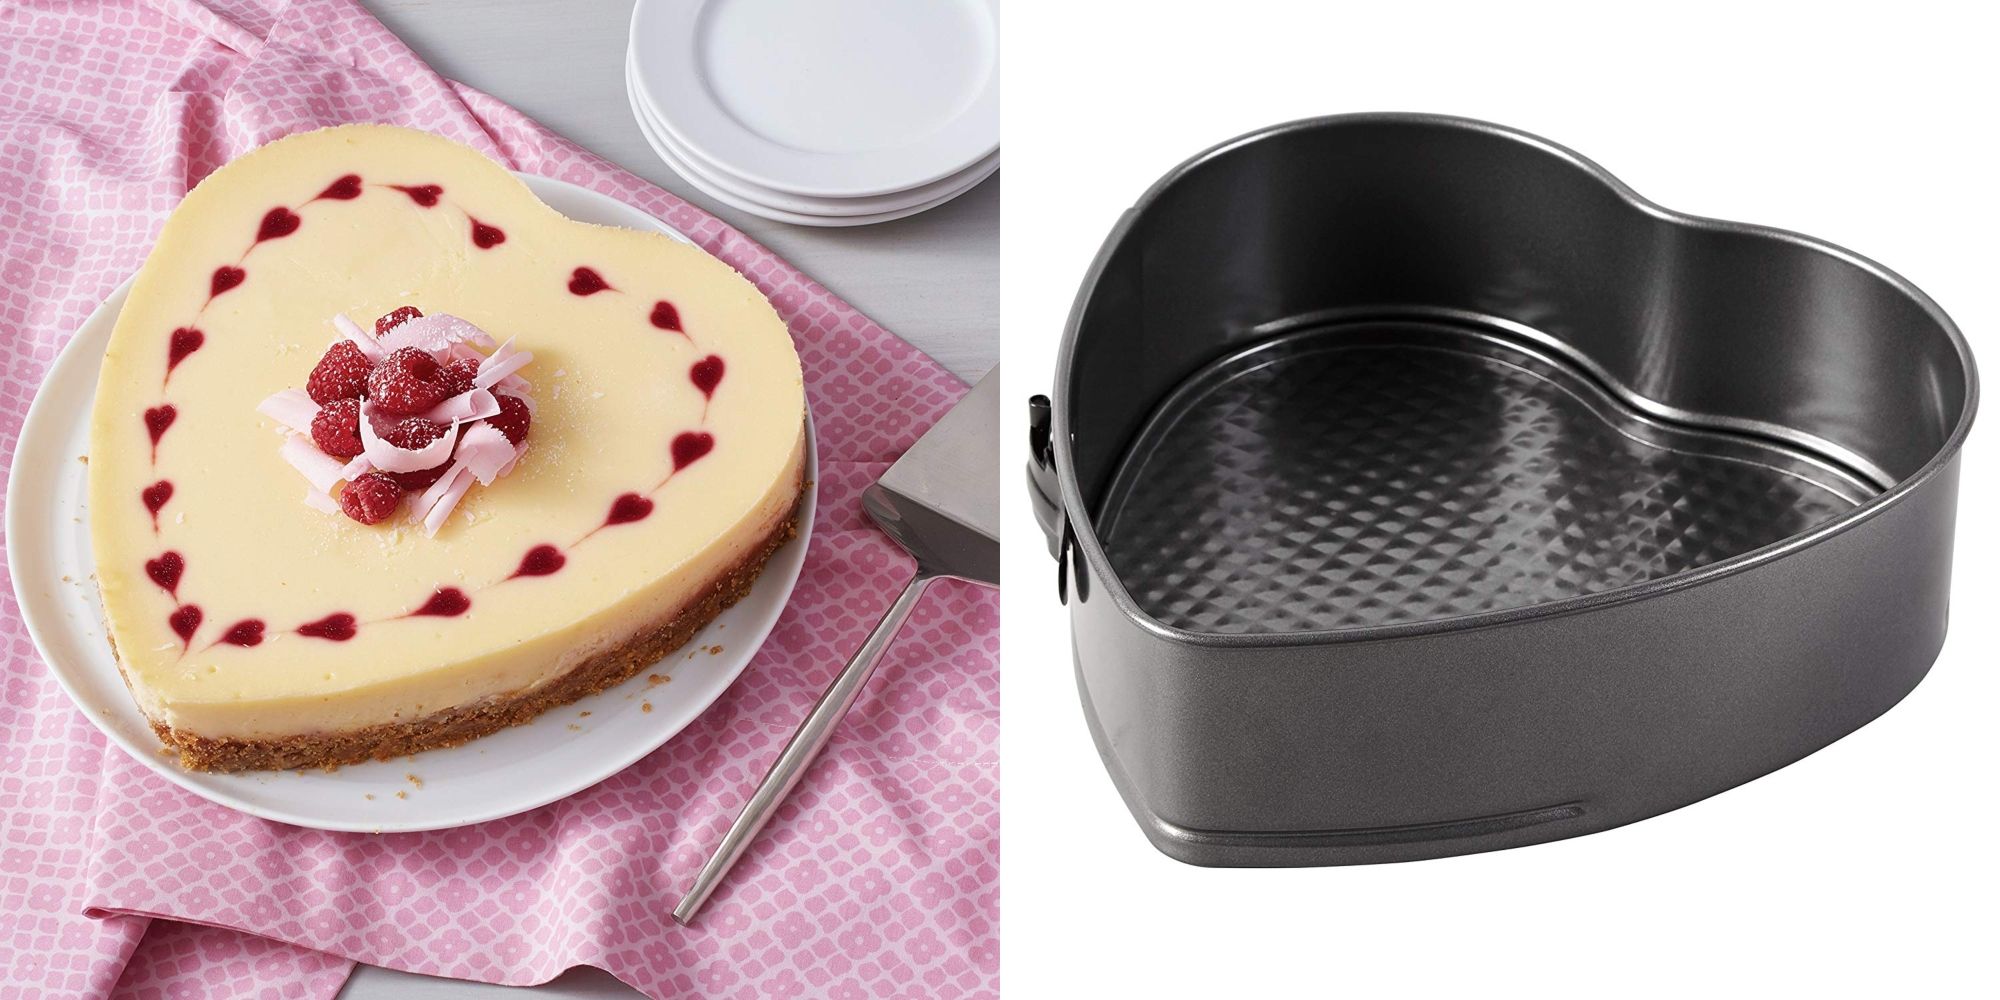 Details about   Happy Valentine's Day Heart Shaped Cake Pan 9.17" X 9.14 X 1.38" BRAND NEW!